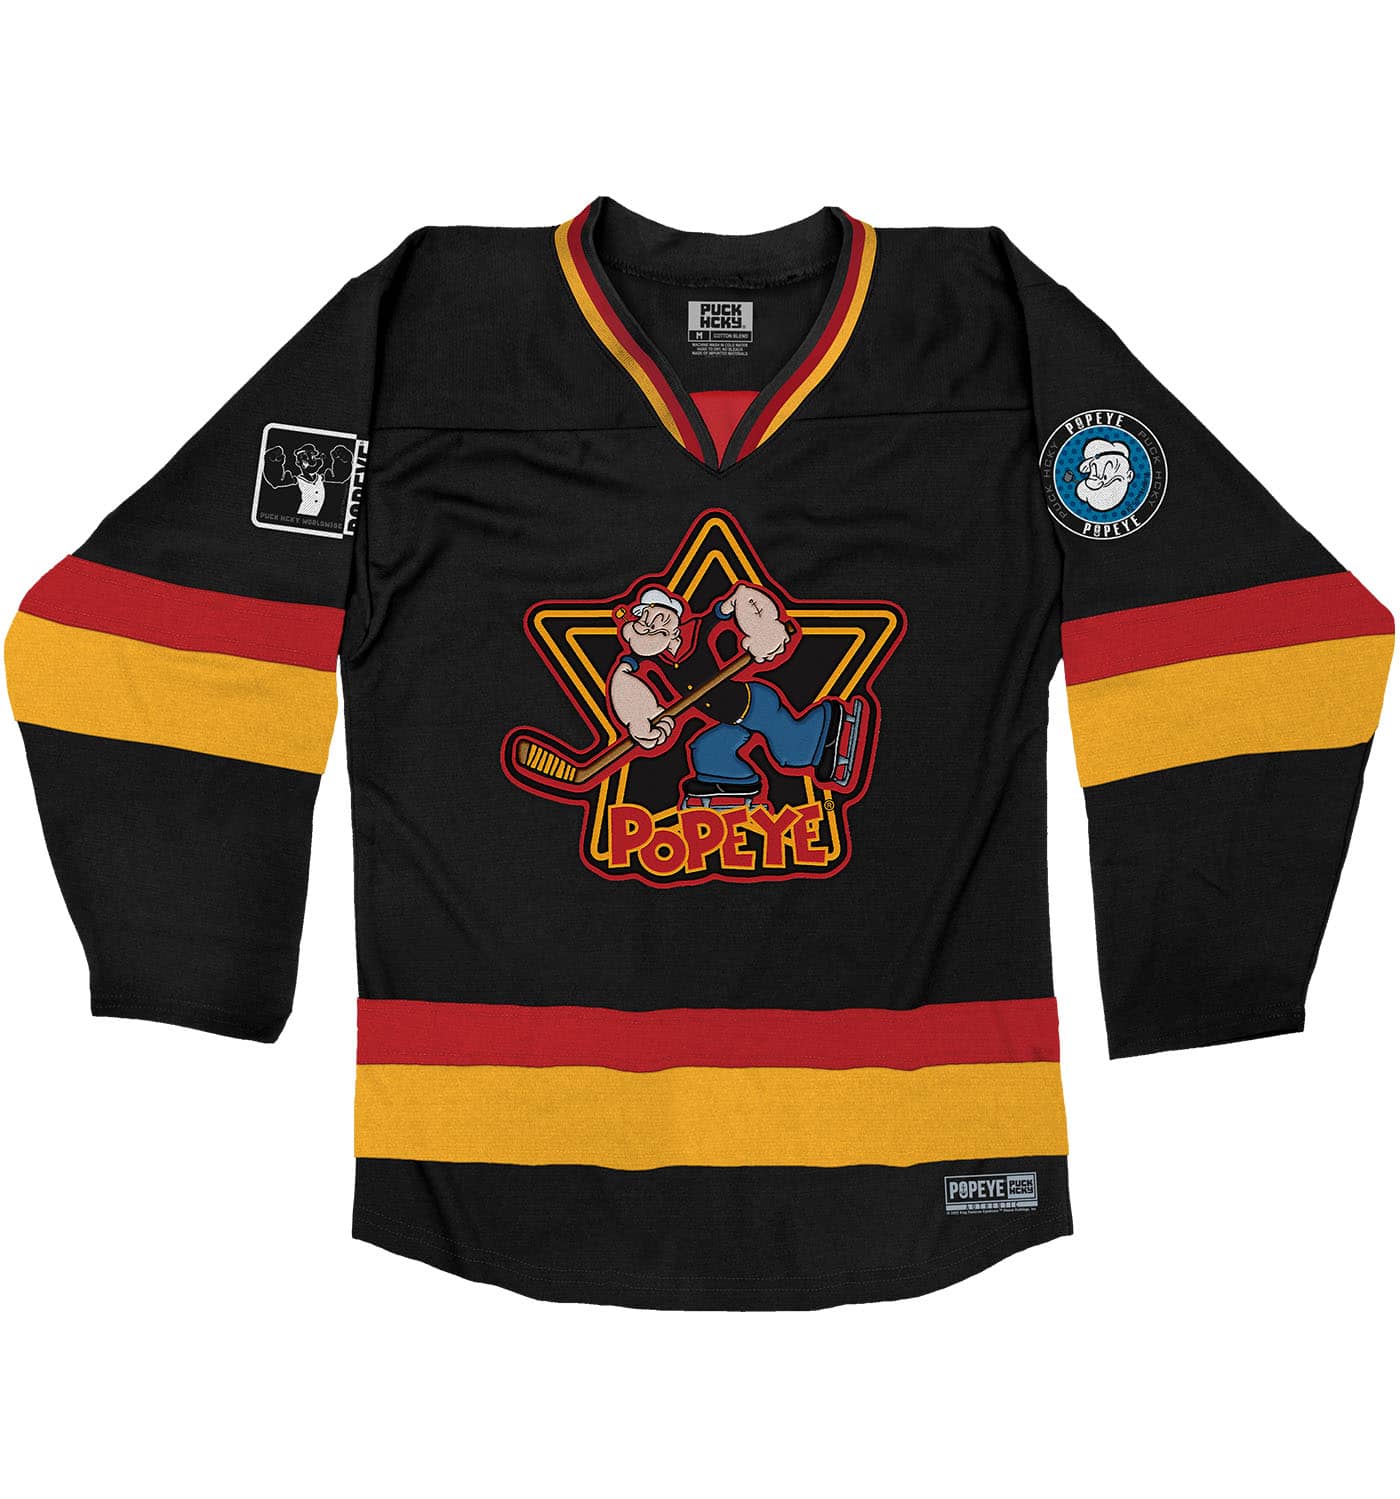 POPEYE 'STRONG TO THE FINISH' deluxe hockey jersey in black, red, and gold front view